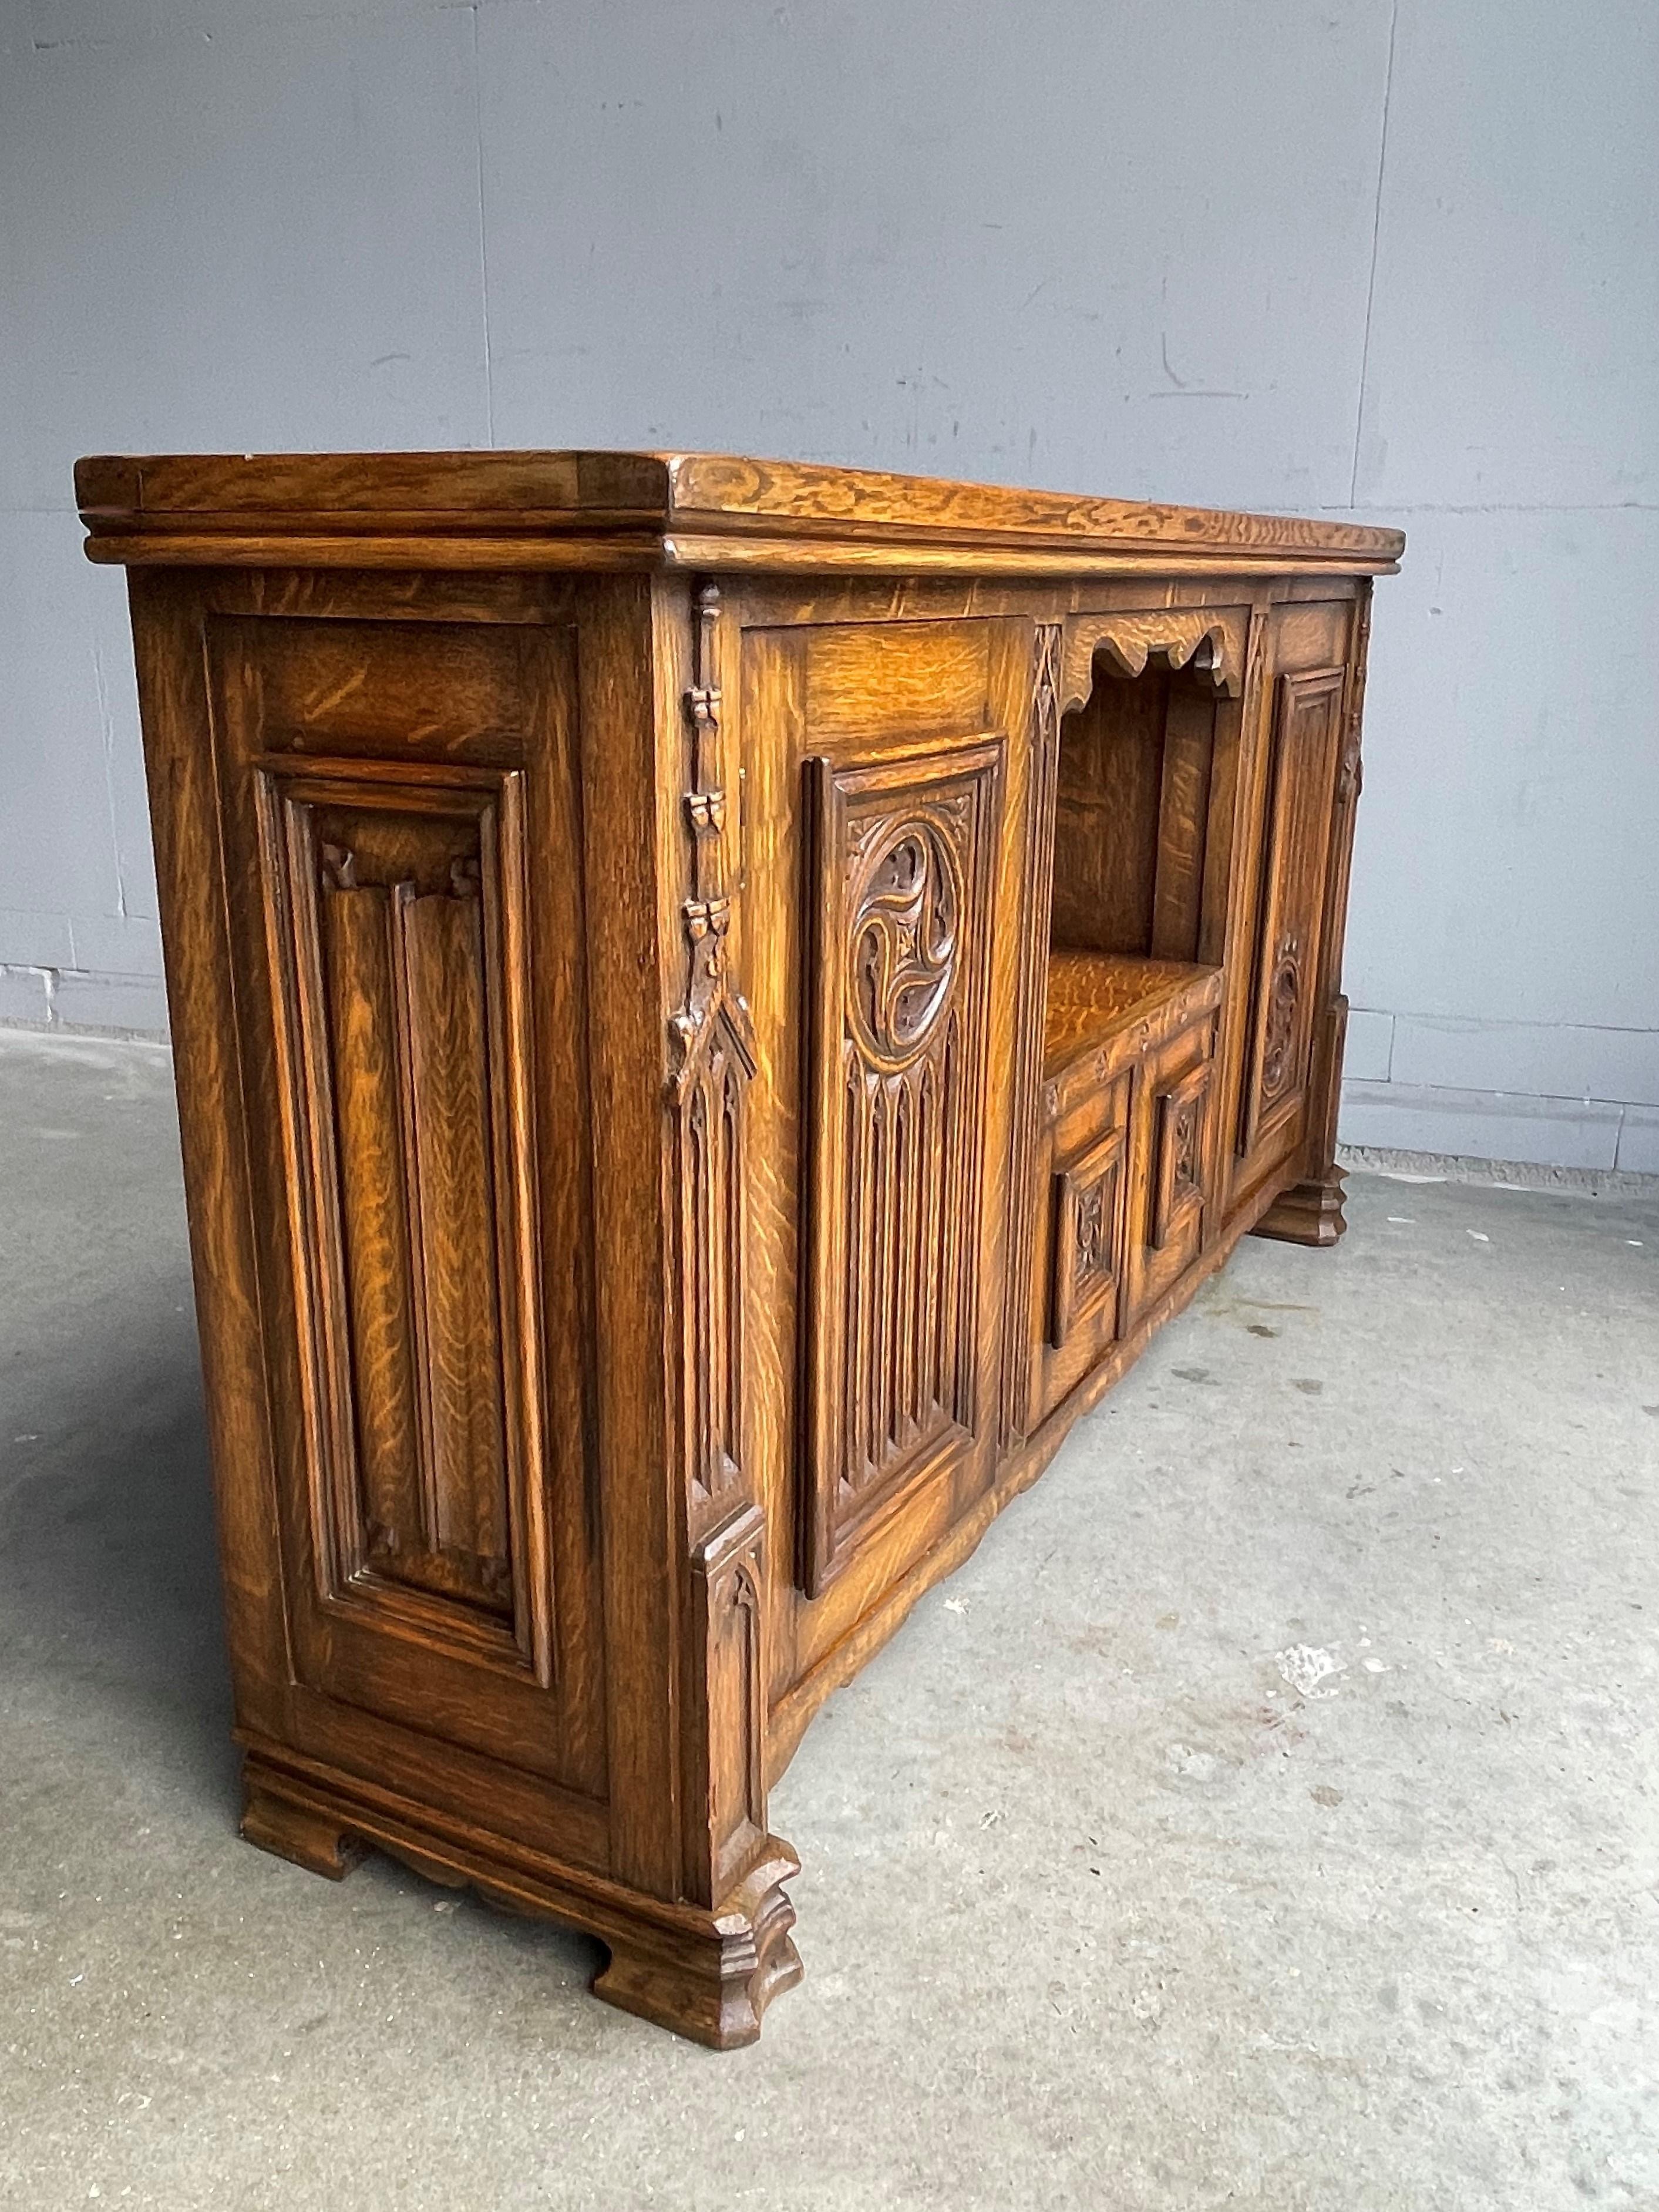 Brass Gothic Revival Solid Oak Sideboard / Sidetable / 1930s Small 4-Door Credenza